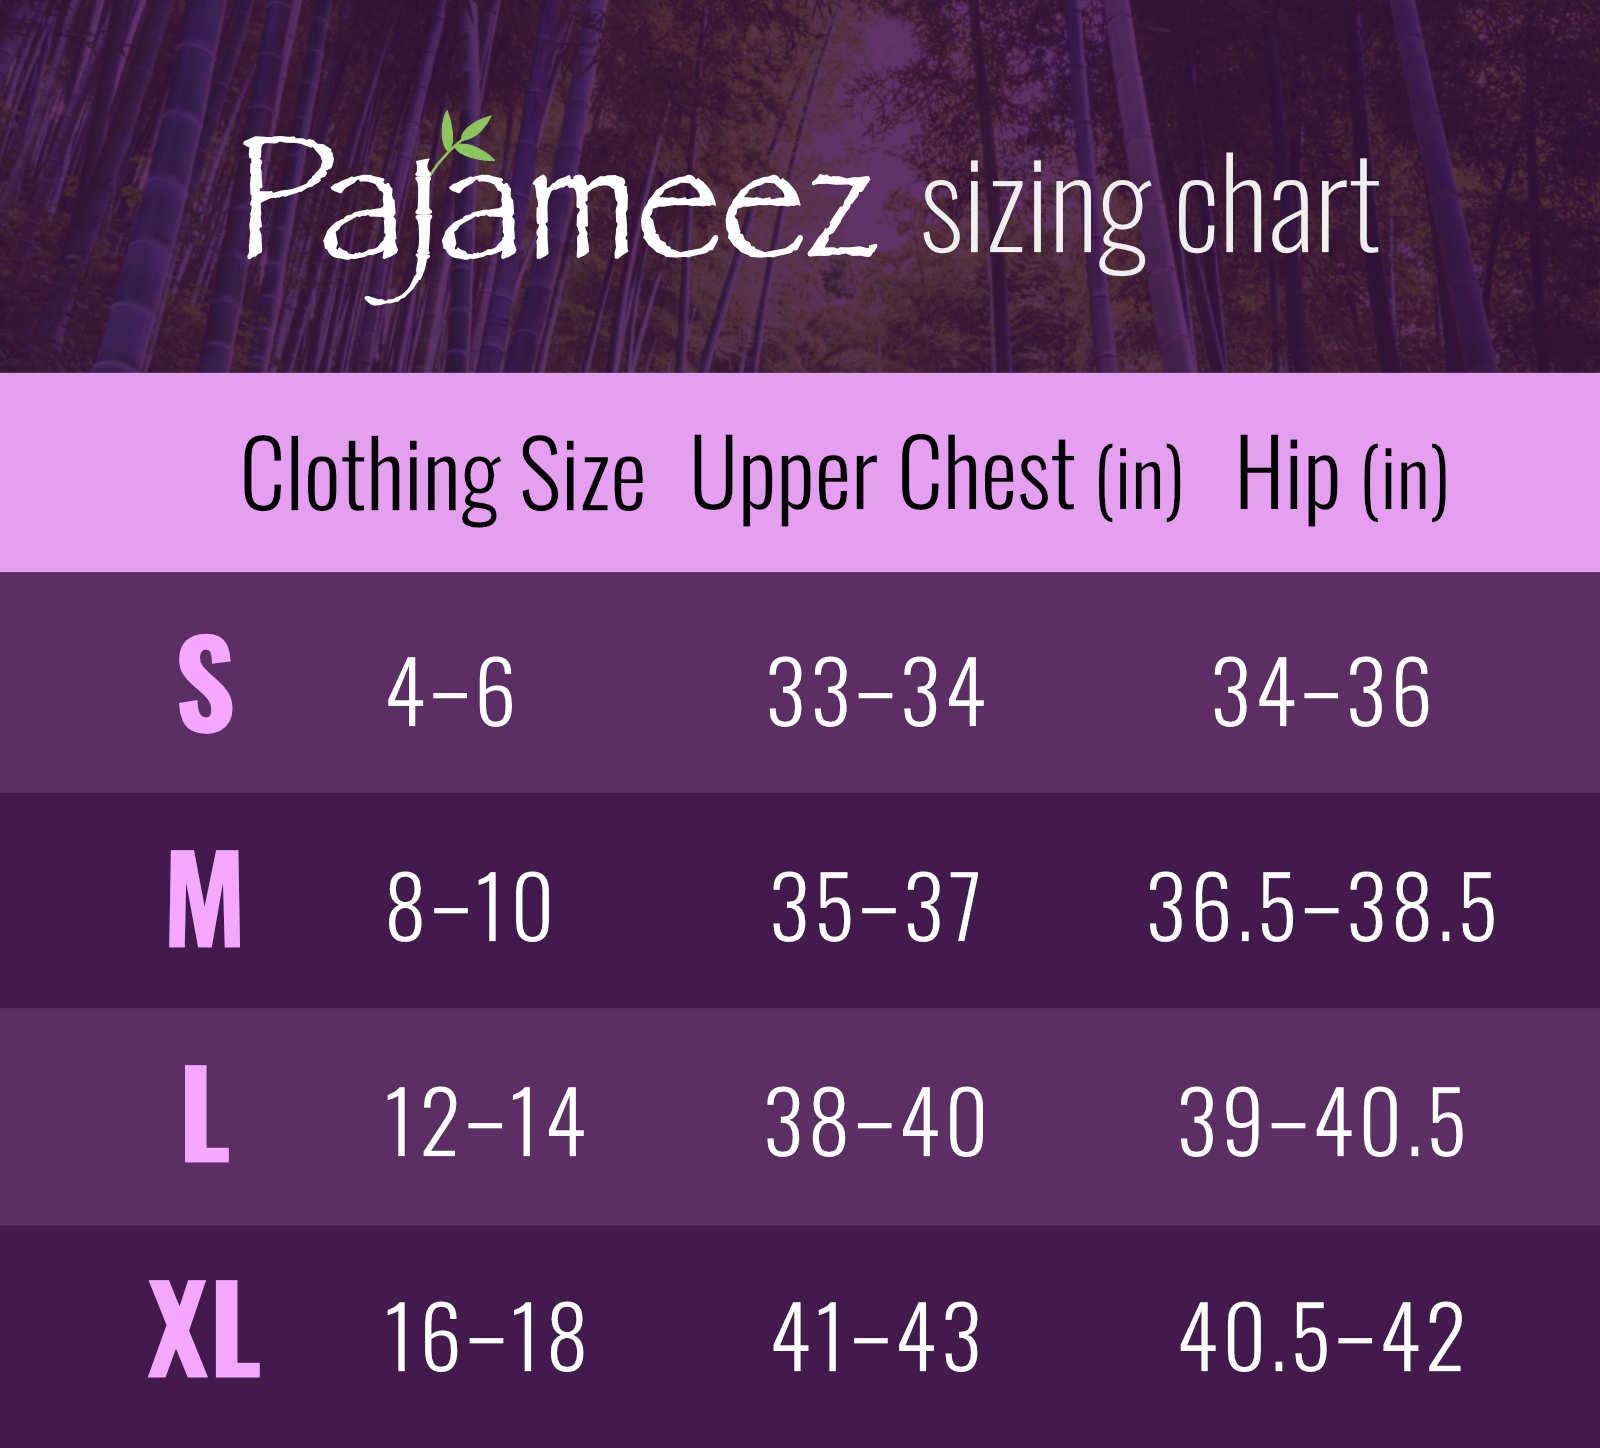 Sizing chart for Shapeez brand featuring Women's Bamboo Pajamas Short Set with Lace, showing clothing sizes ranging from s to xl with corresponding measurements for upper chest and hips in inches, set against a